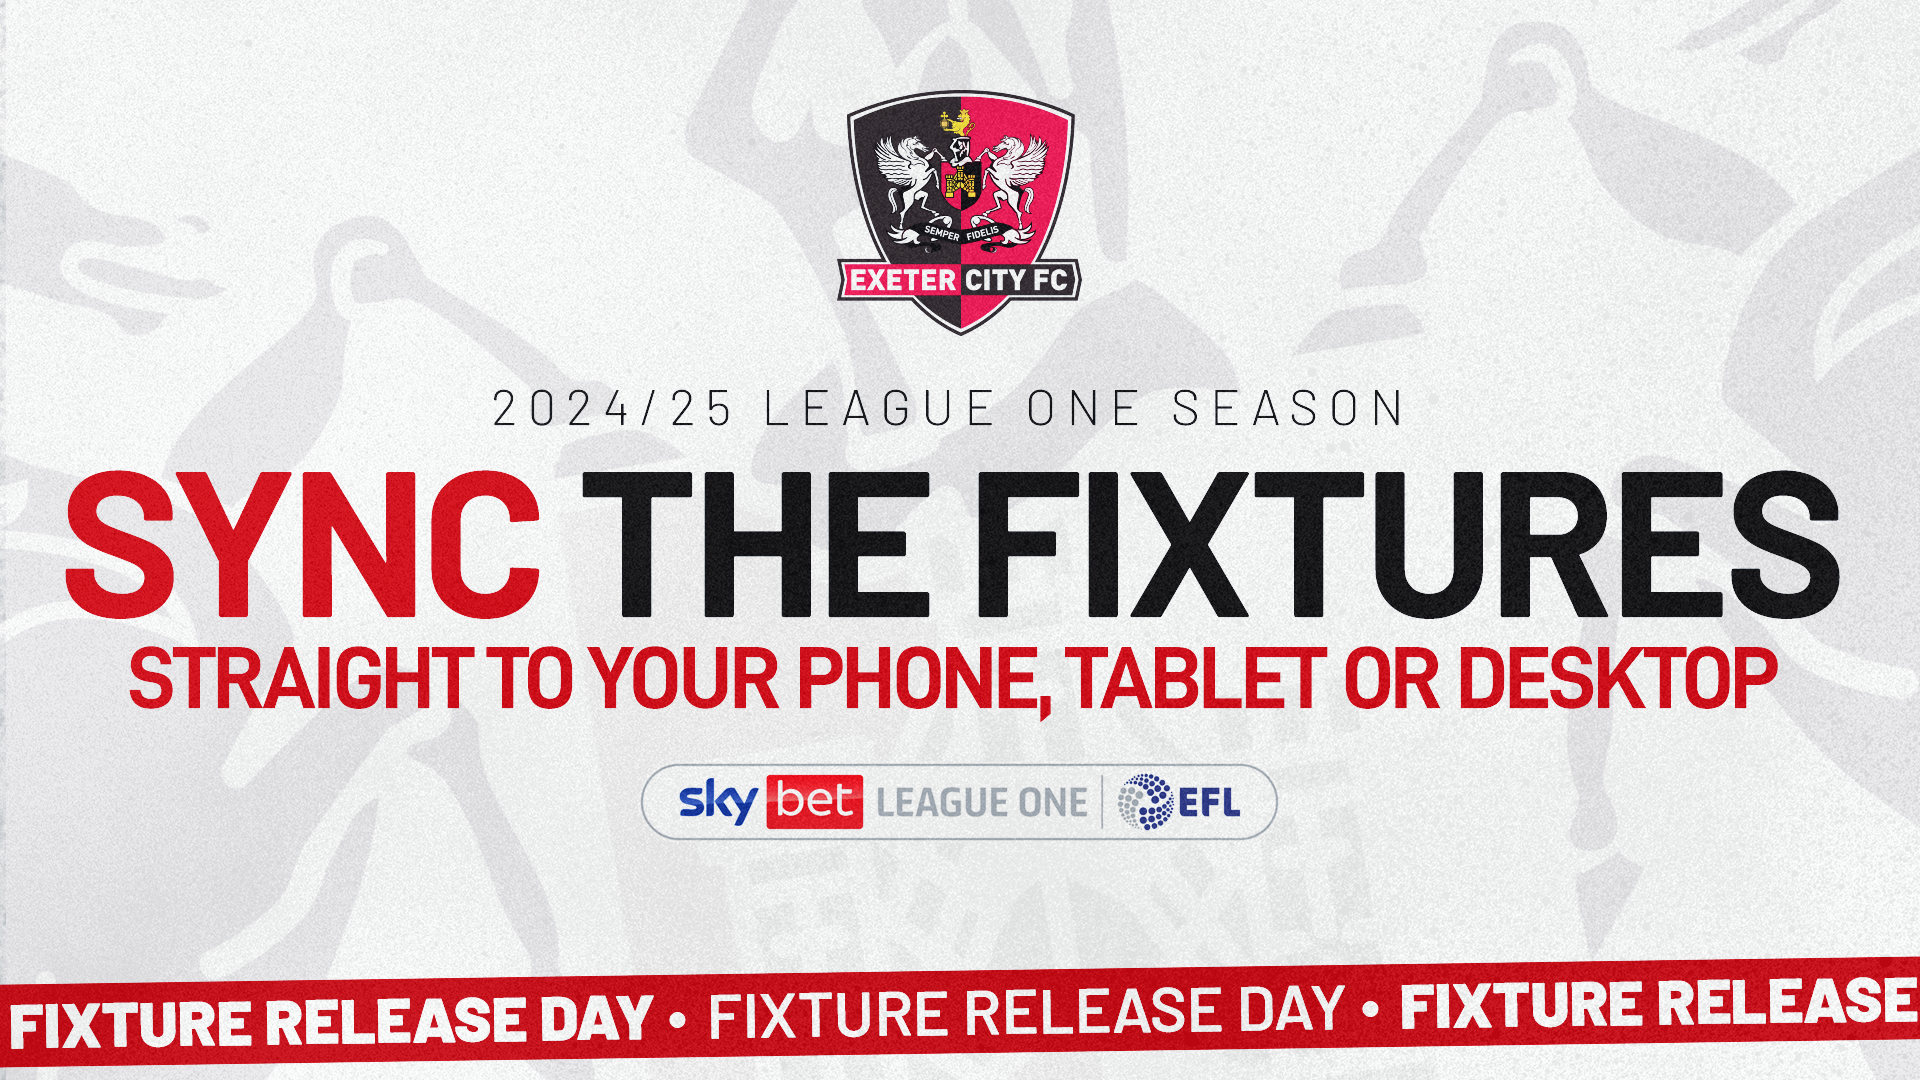 Sync the fixtures direct to your calendar!